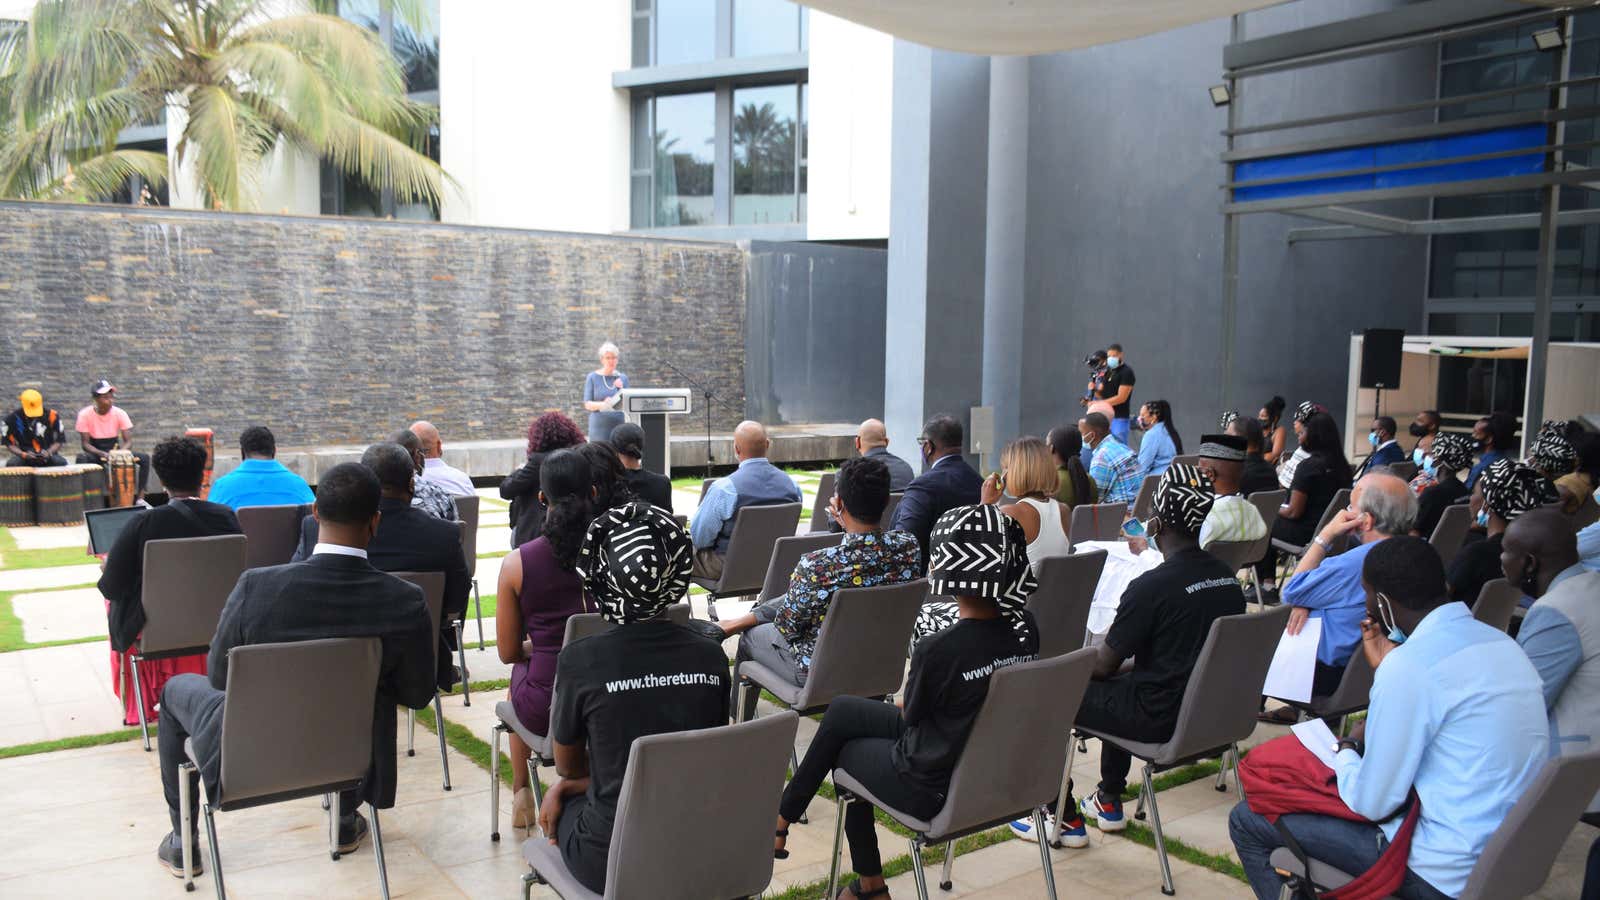 US embassy authorities hold an opening ceremony for “The Return,” an initiative to deepen ties between Senegal and African Americans.